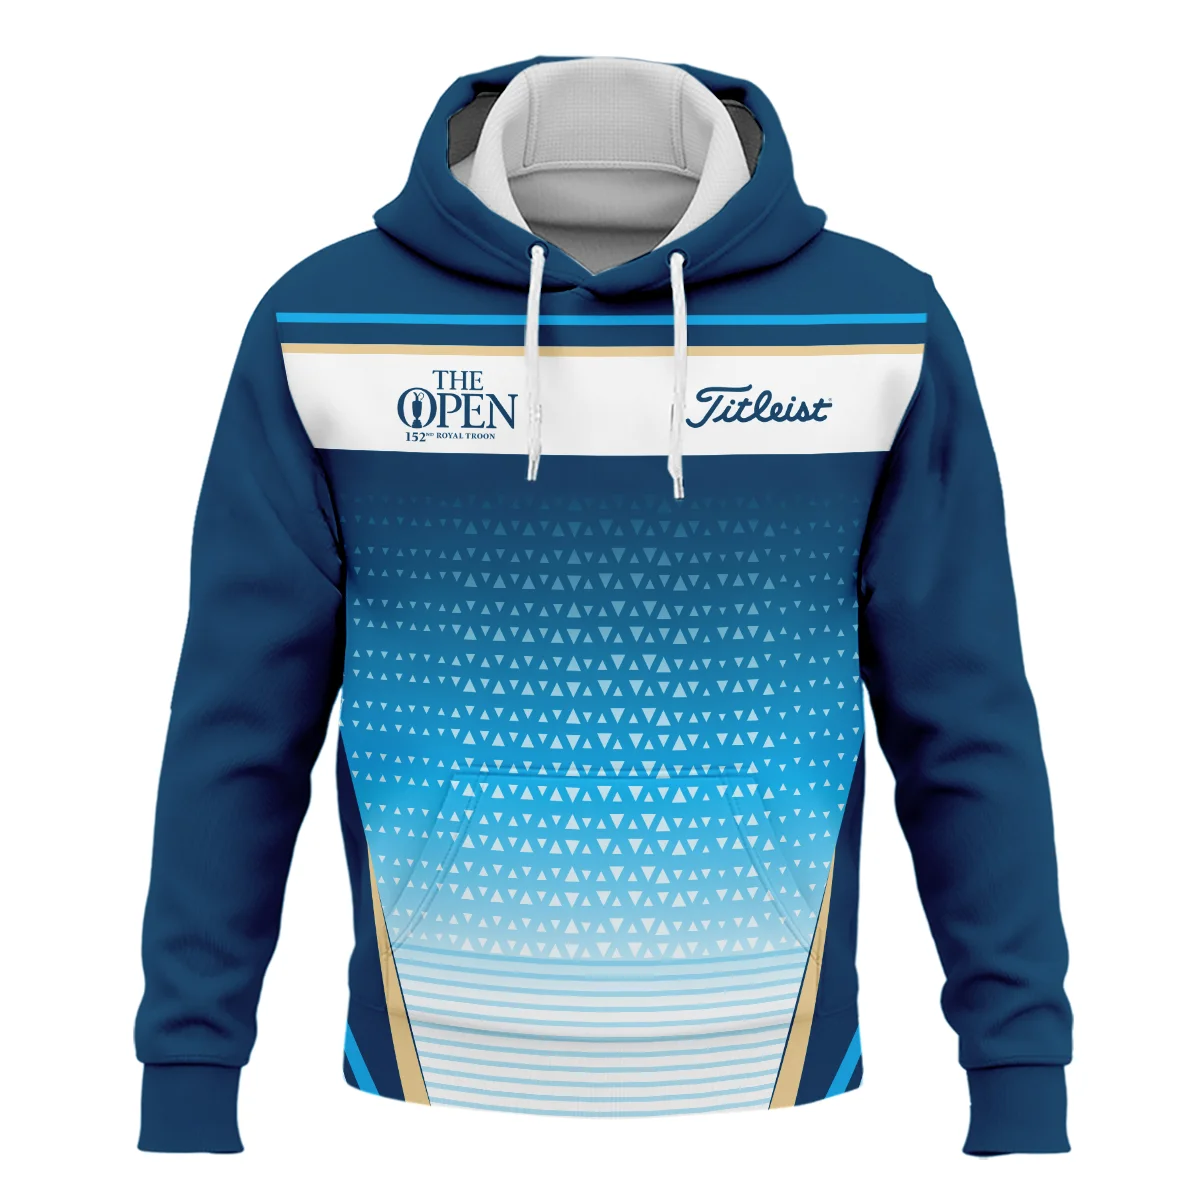 152nd The Open Championship Golf Blue Yellow White Pattern Background Titleist Quarter-Zip Jacket All Over Prints HOTOP250624A01TLSWZ